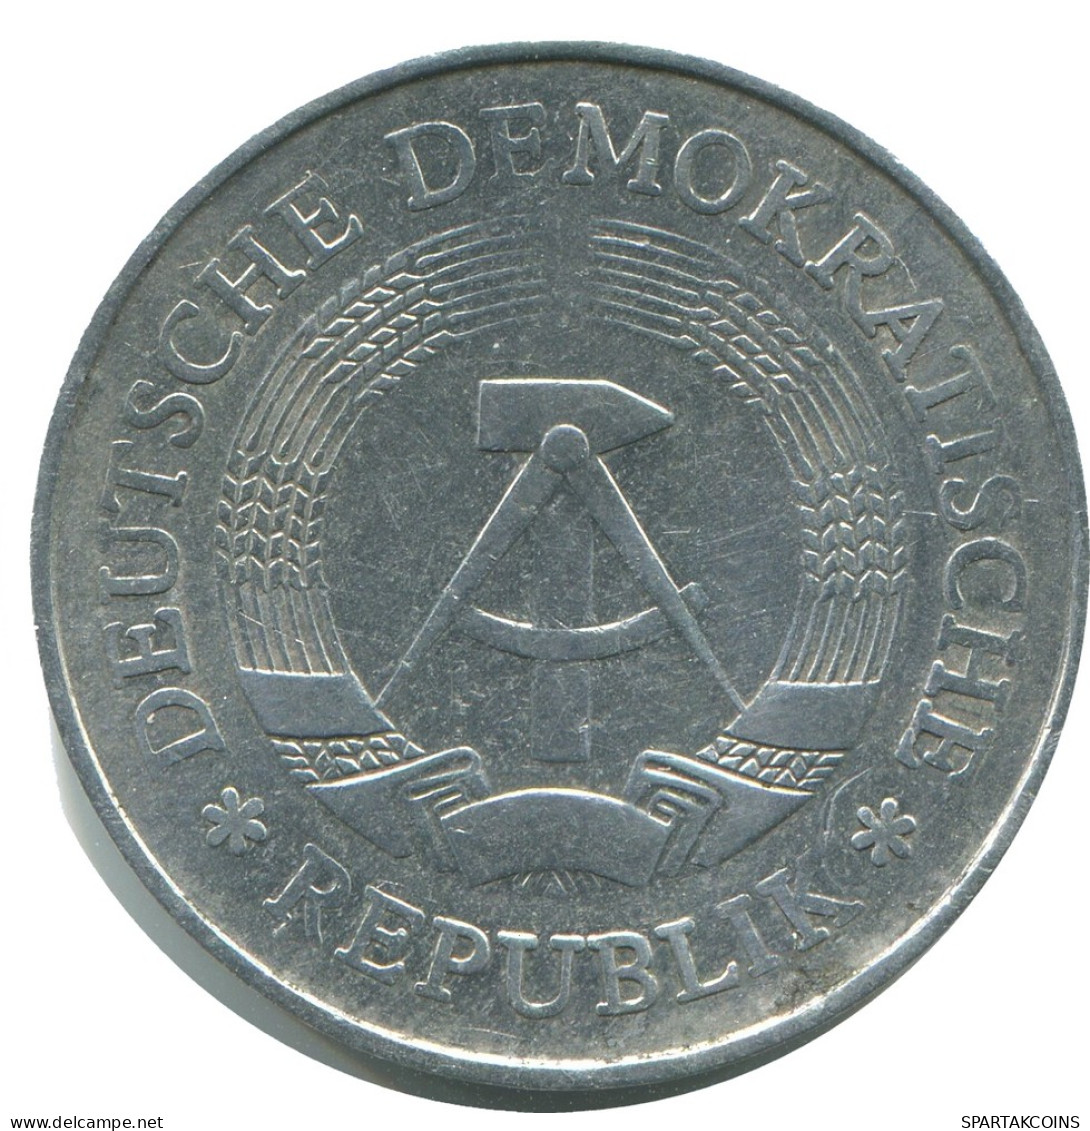 1 MARK 1977 A DDR EAST DEUTSCHLAND Münze GERMANY #AE136.D - 1 Marco